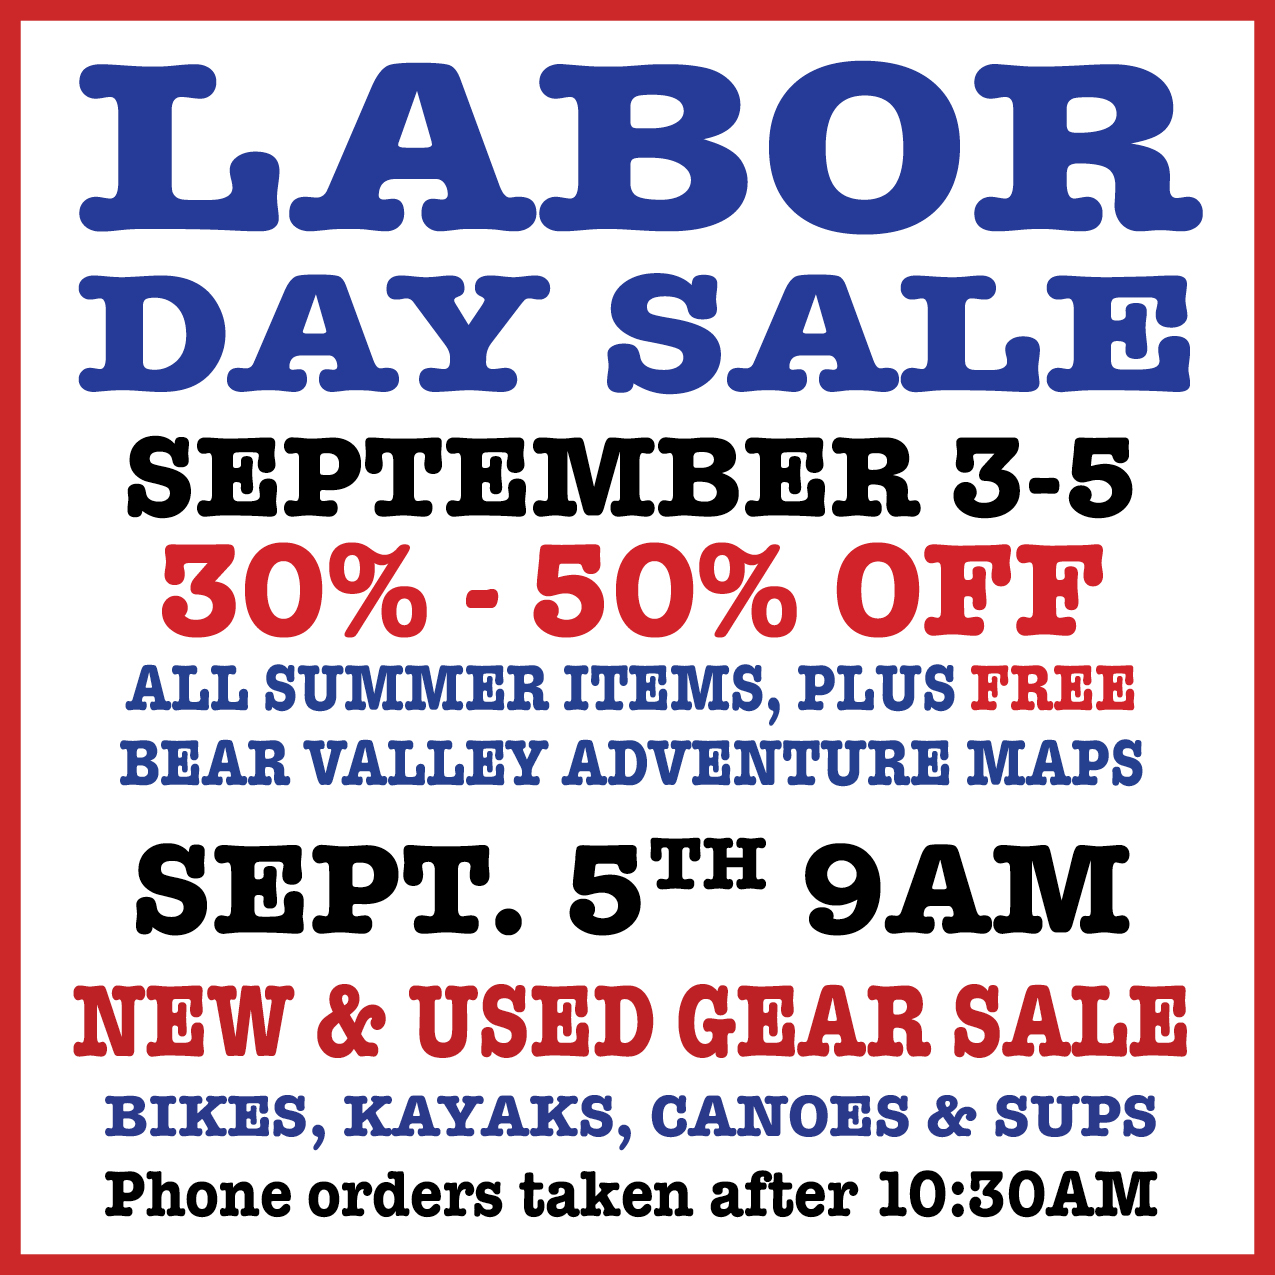 The Big Labor Day Weekend Sale at Bear Valley Adventure Company